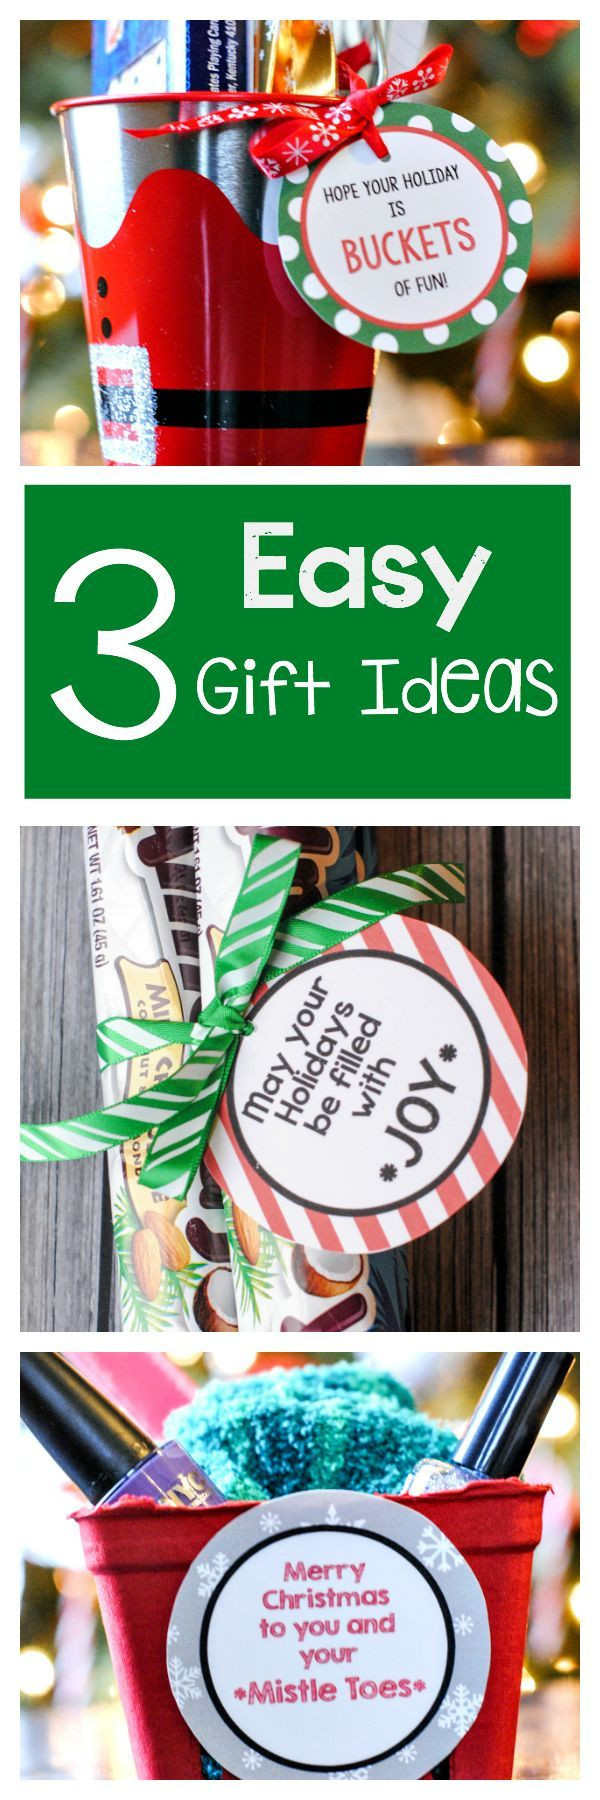 Coworker Thank You Gift Ideas
 Best 25 Thank you t ideas for coworkers ideas on